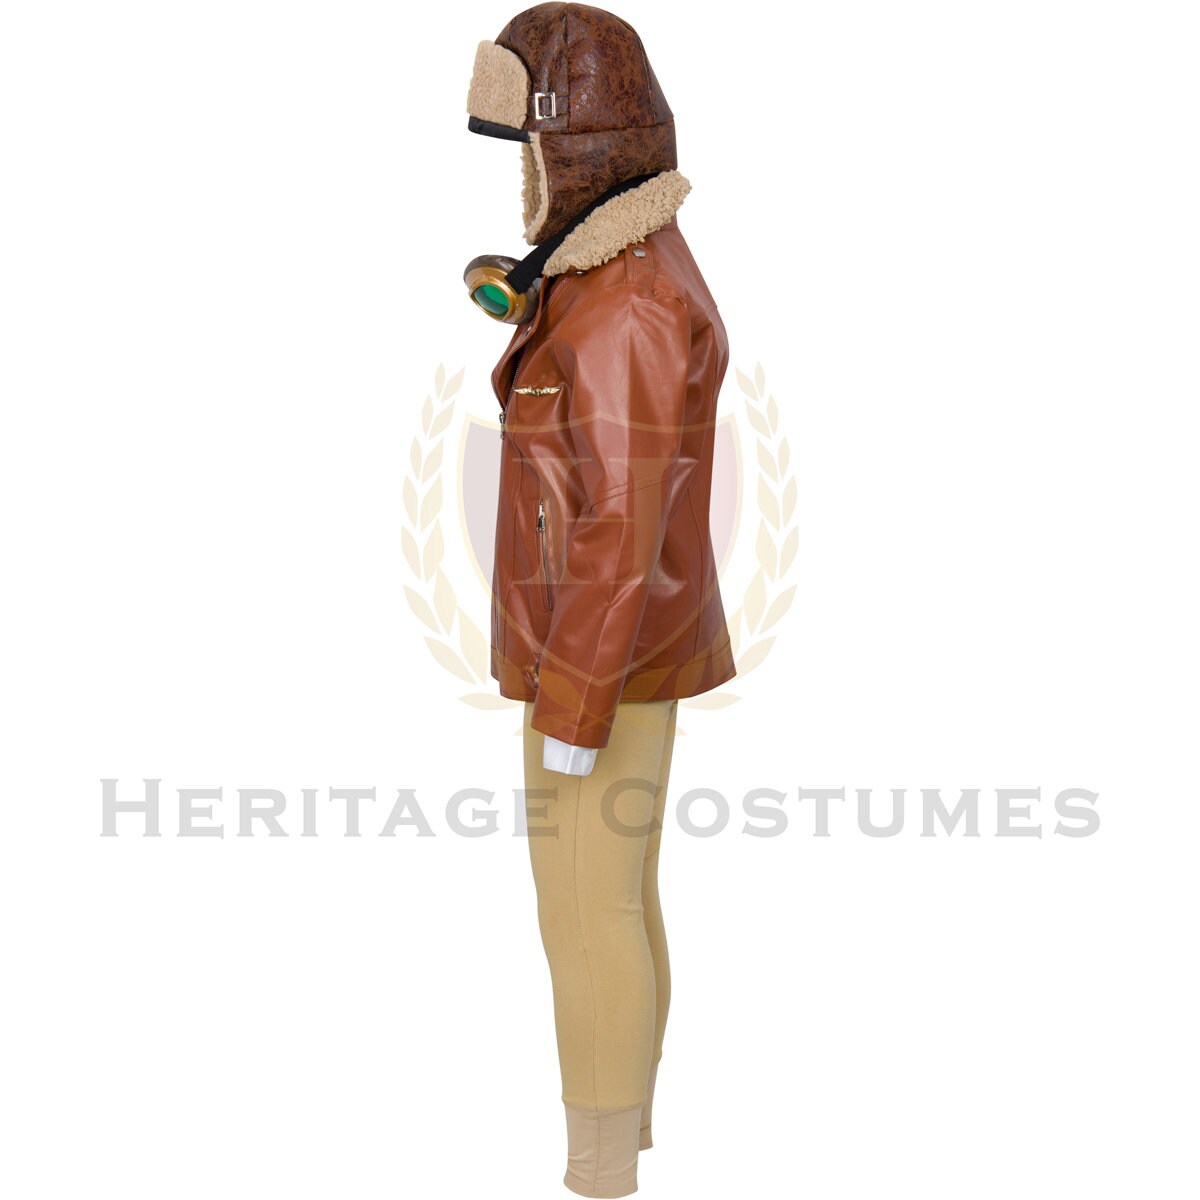 Amelia Earhart Children's Aviator Costume, Inspired by Night at the Museum.